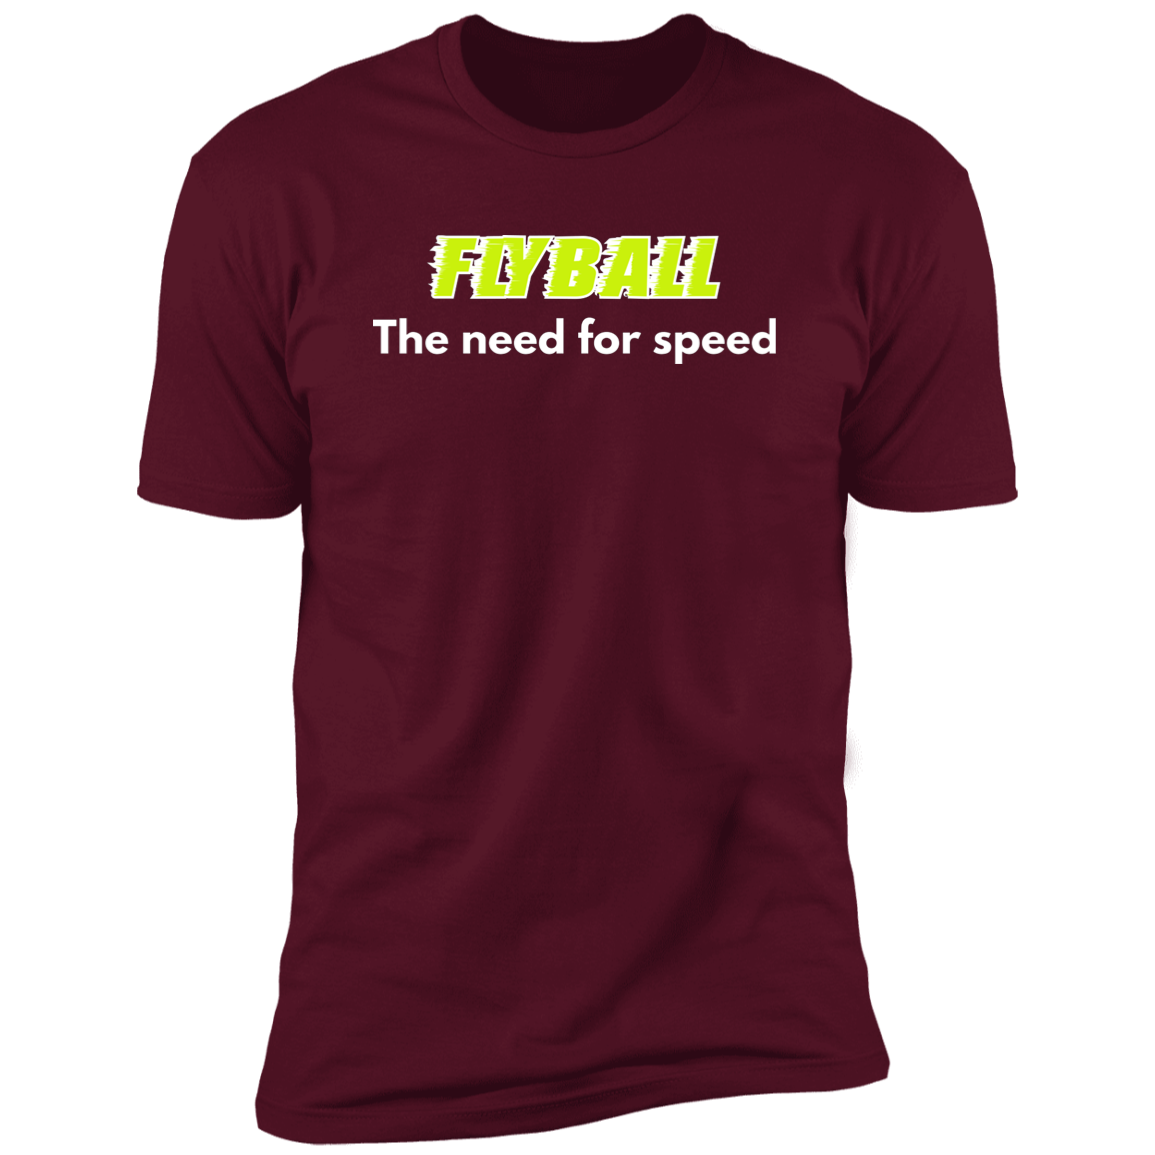 Flyball The Need For Speed dog shirt, dog shirt for humans, sporting dog shirt, in maroon